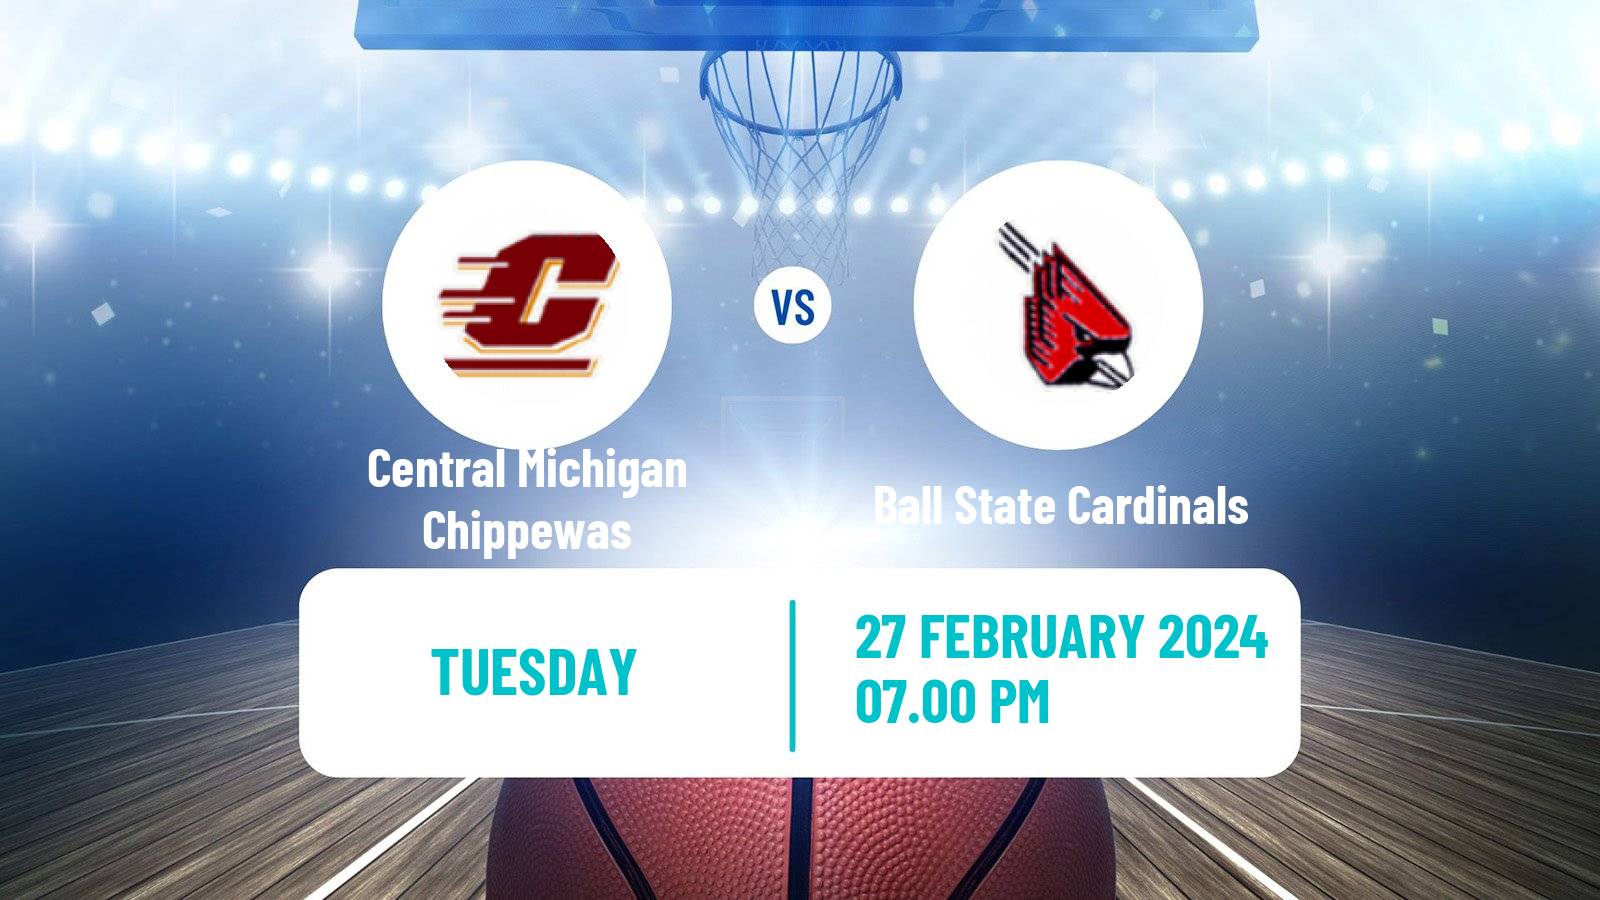 Basketball NCAA College Basketball Central Michigan Chippewas - Ball State Cardinals